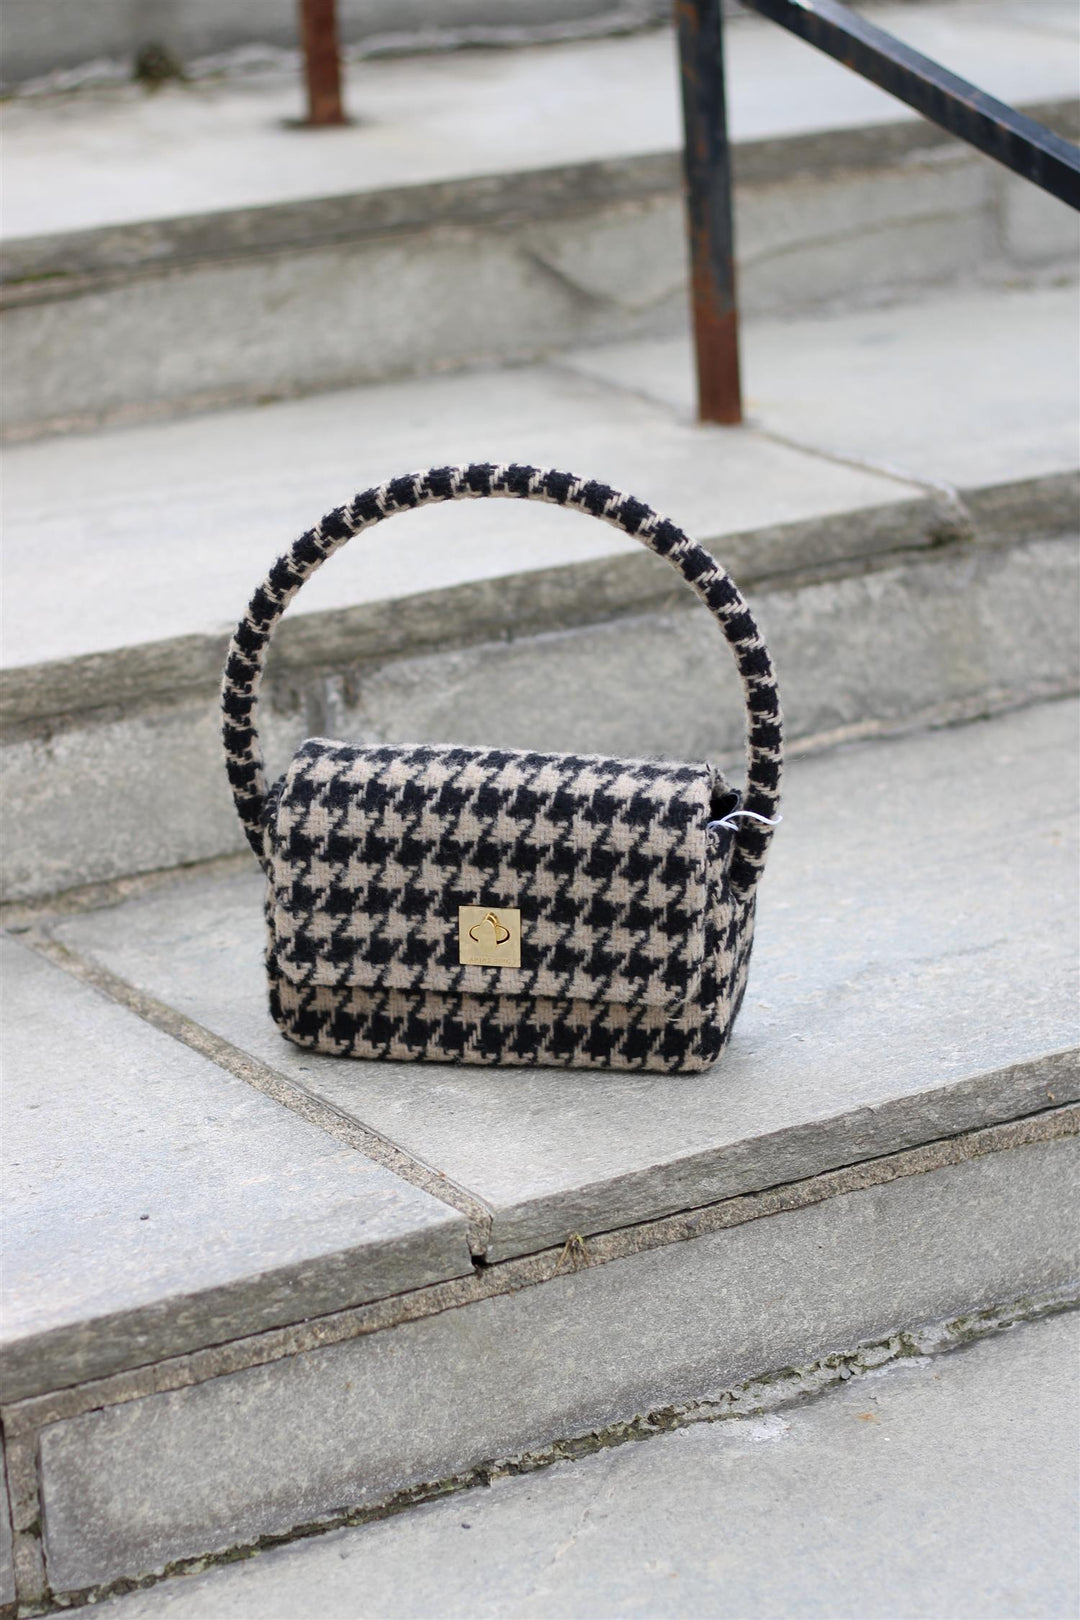 Anine Bing - Nico Bag in Houndstooth